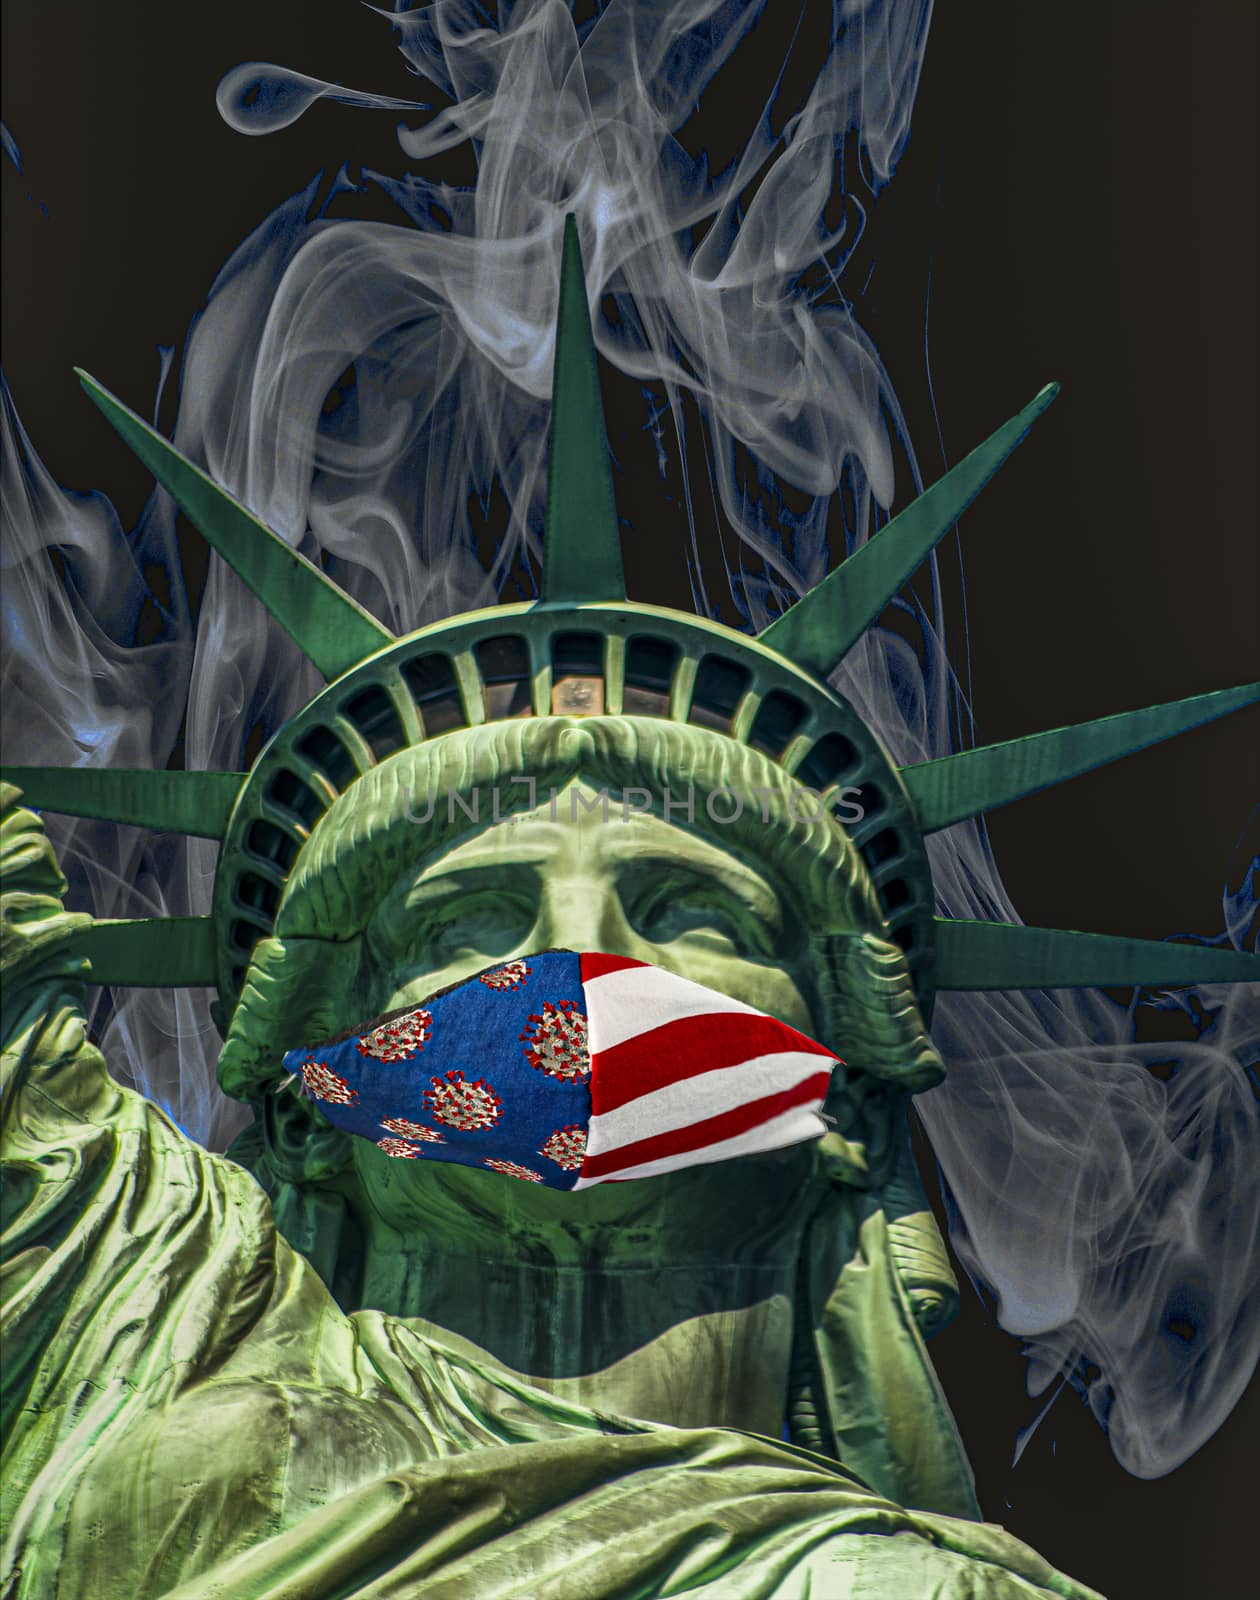 the statue of liberty wearing a coronavirus mask surrounded by smog in new york. United States.